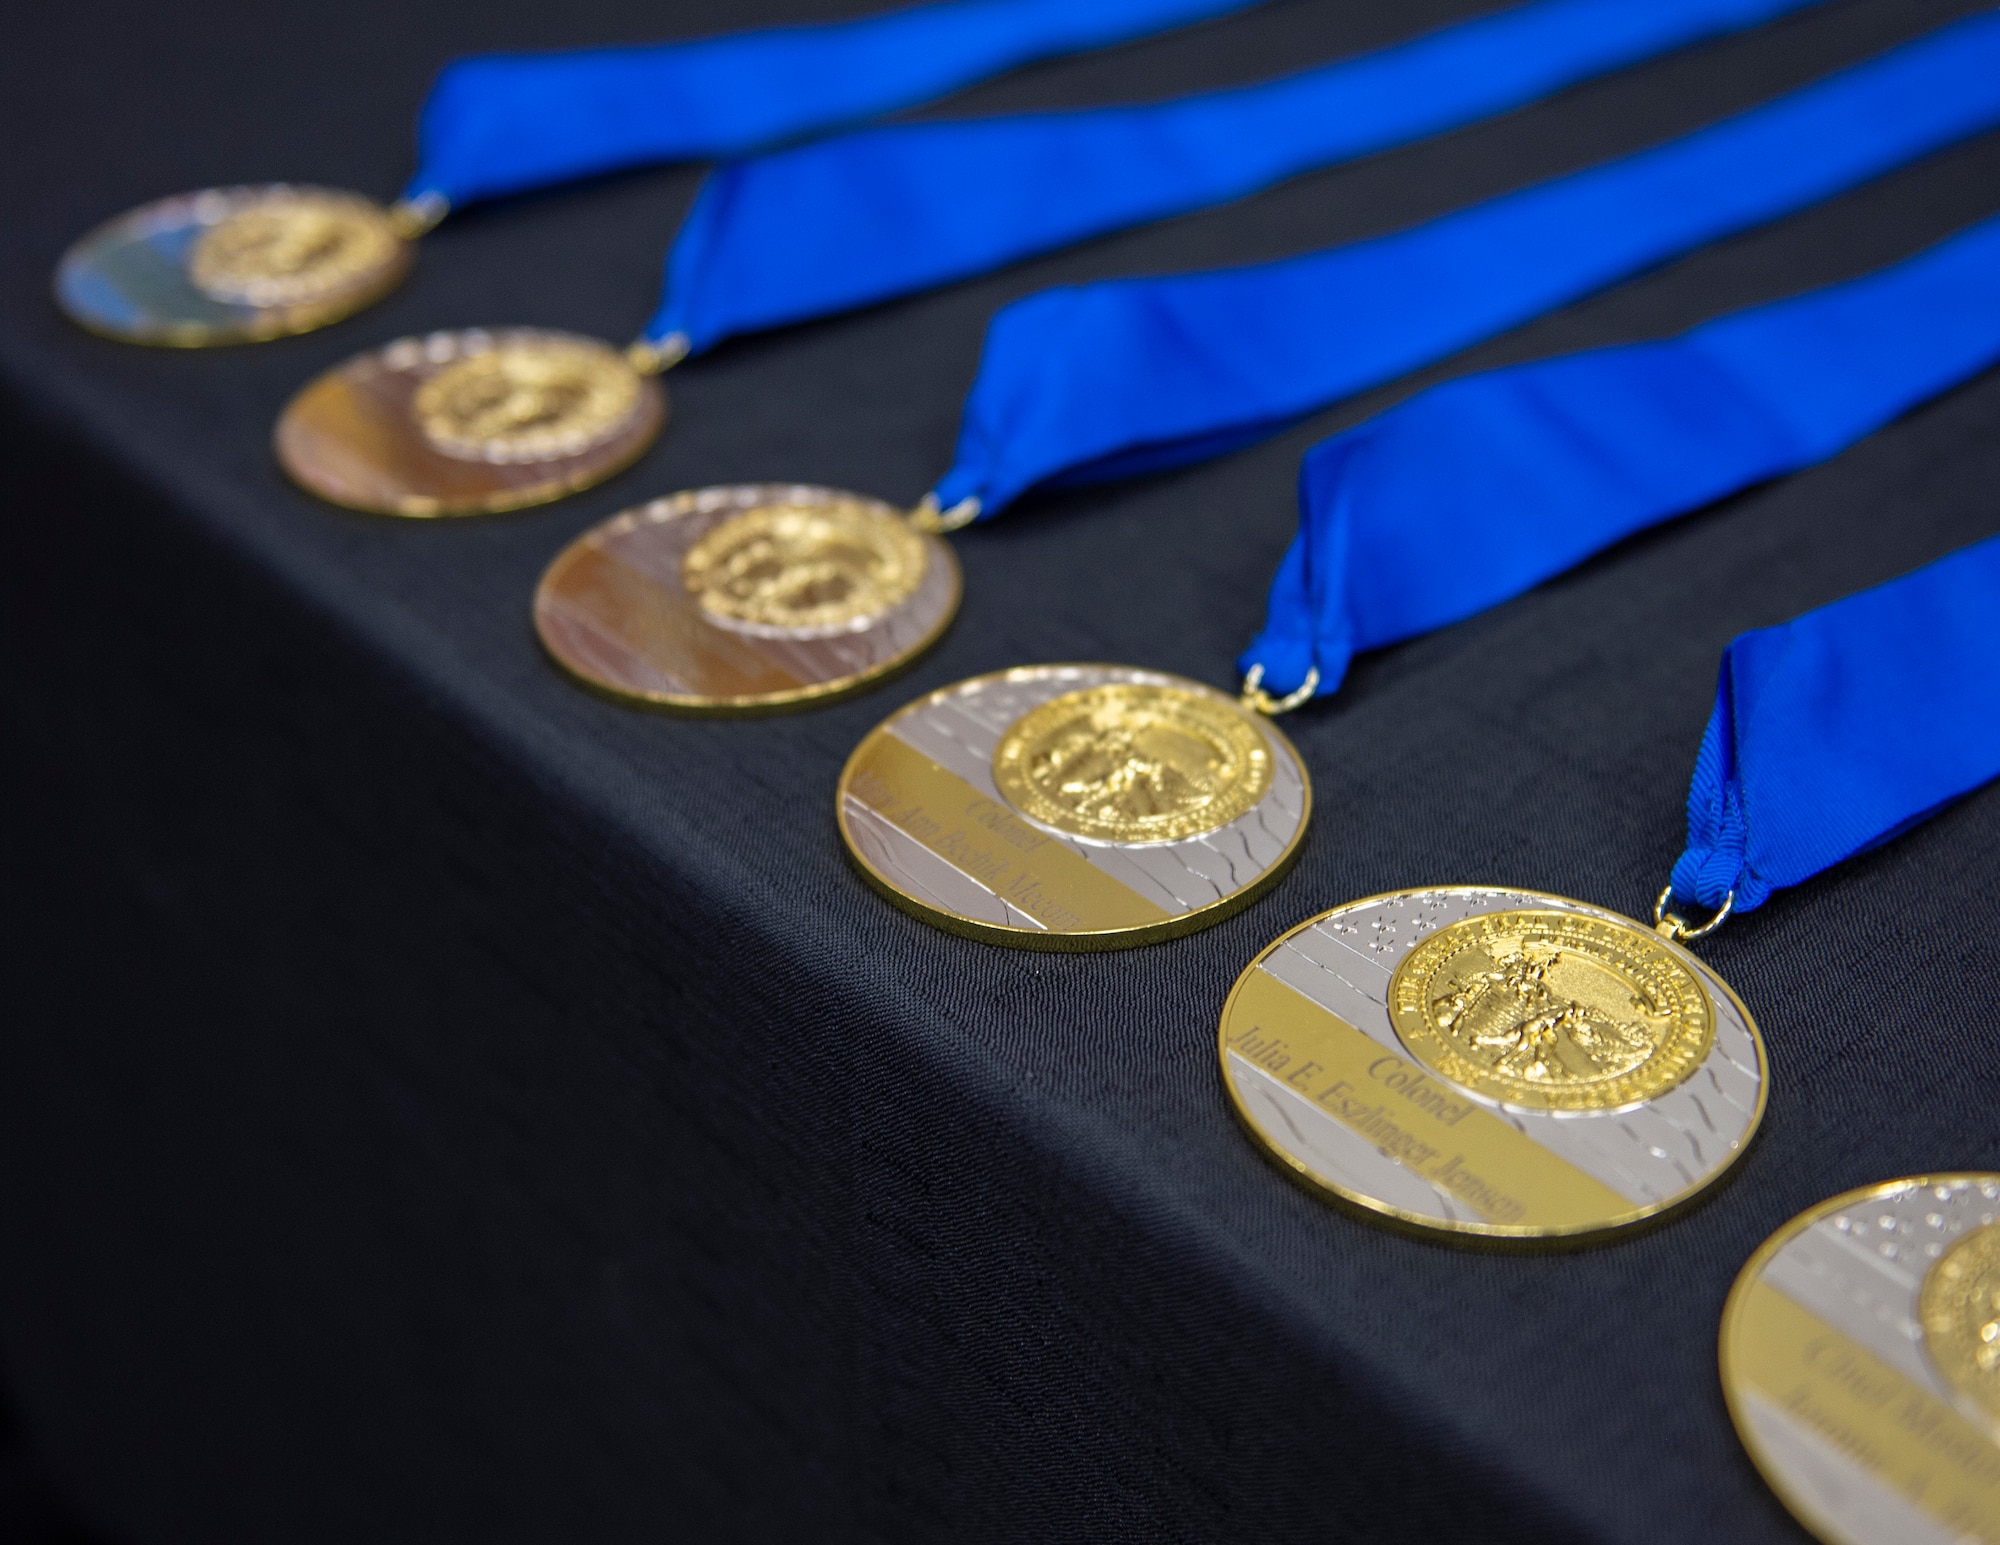 Medals for the 2021 Flight of Honor ceremony are on display in St. Paul, Minn., Oct. 17, 2021.